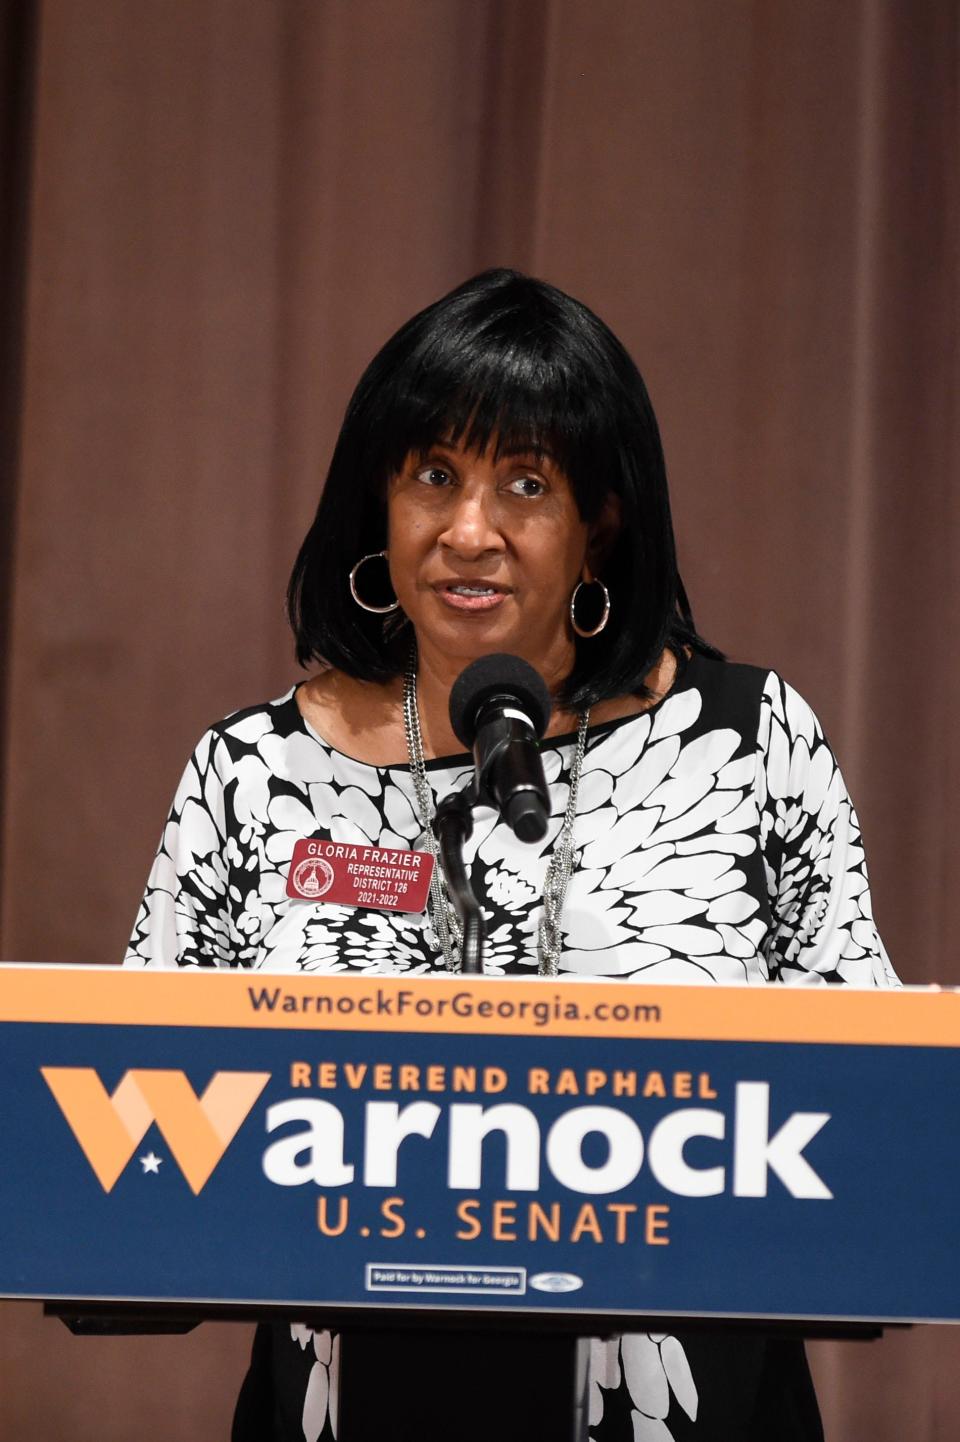 FILE - Georgia Rep. Gloria Frazier speaks during the Warnock for Georgia rally at Augusta Technical College on Thursday, Sept. 1, 2022. Frazier has raised nearly $26,000 for her re-election bid.